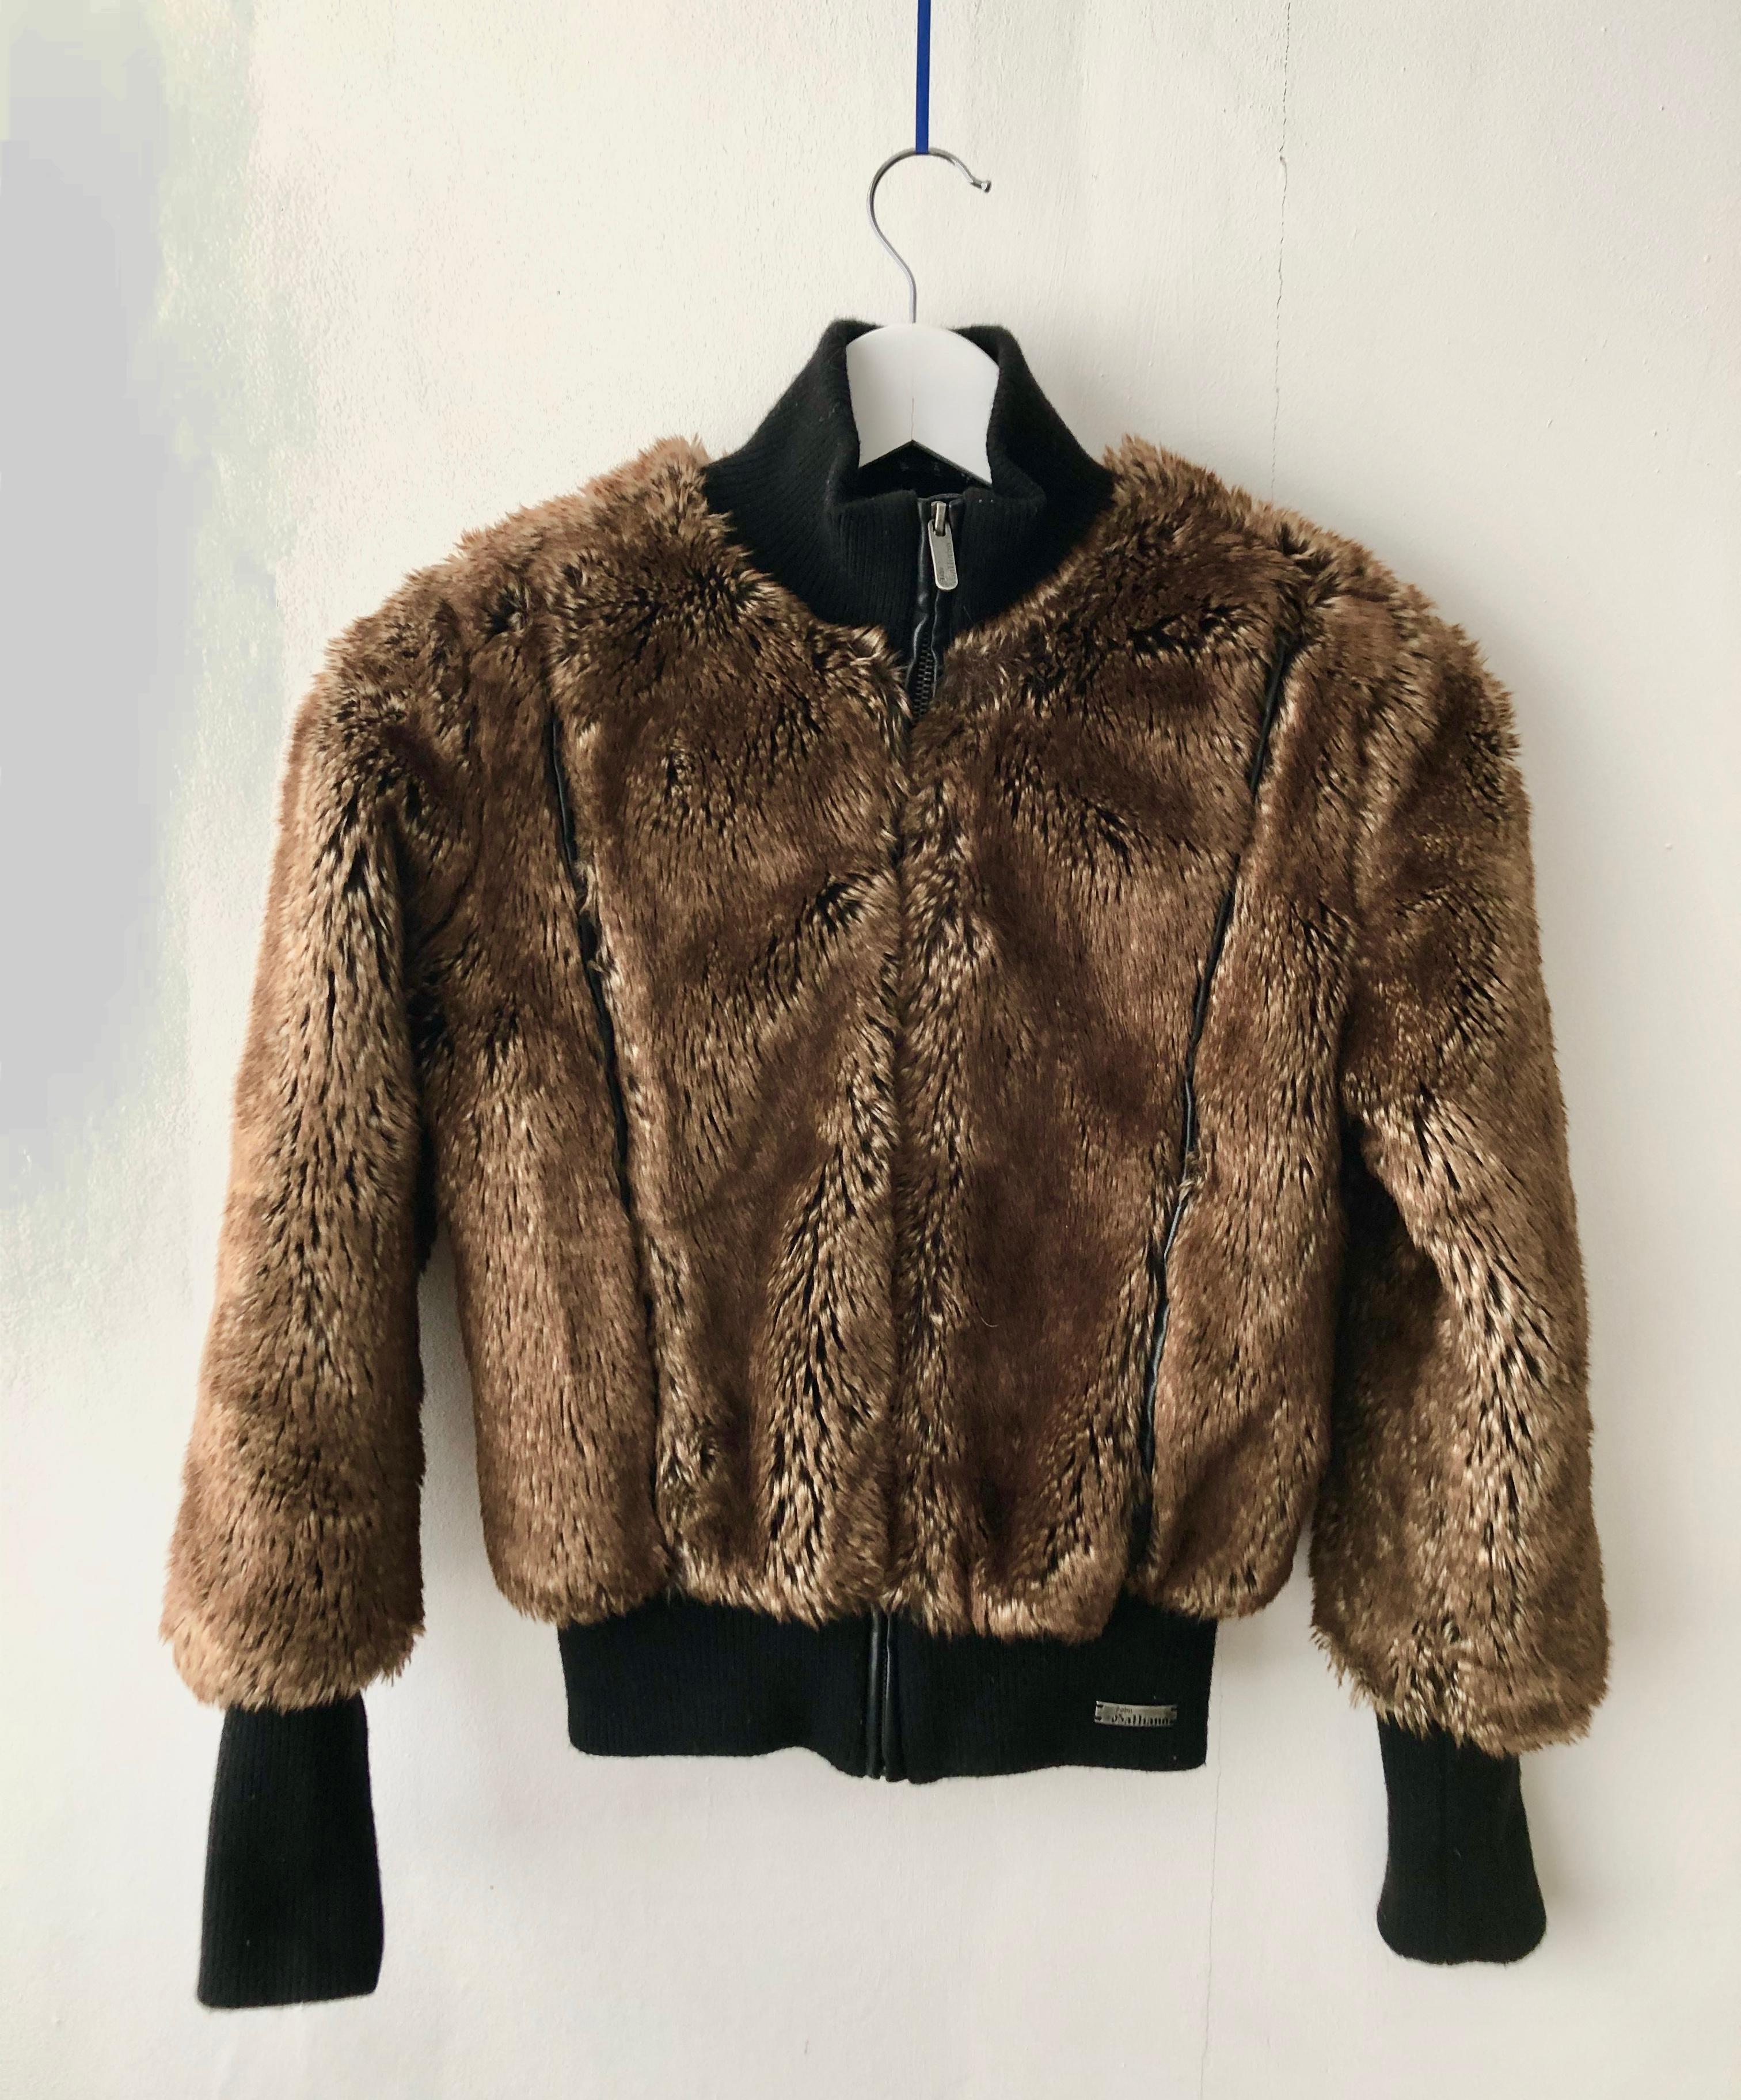 John Galliano Faux Fur bomber jacket, iconic newspaper interior print 
Size: Small / 40 Italian/  8 UK 
Condition: very good vintage , late 1990s 